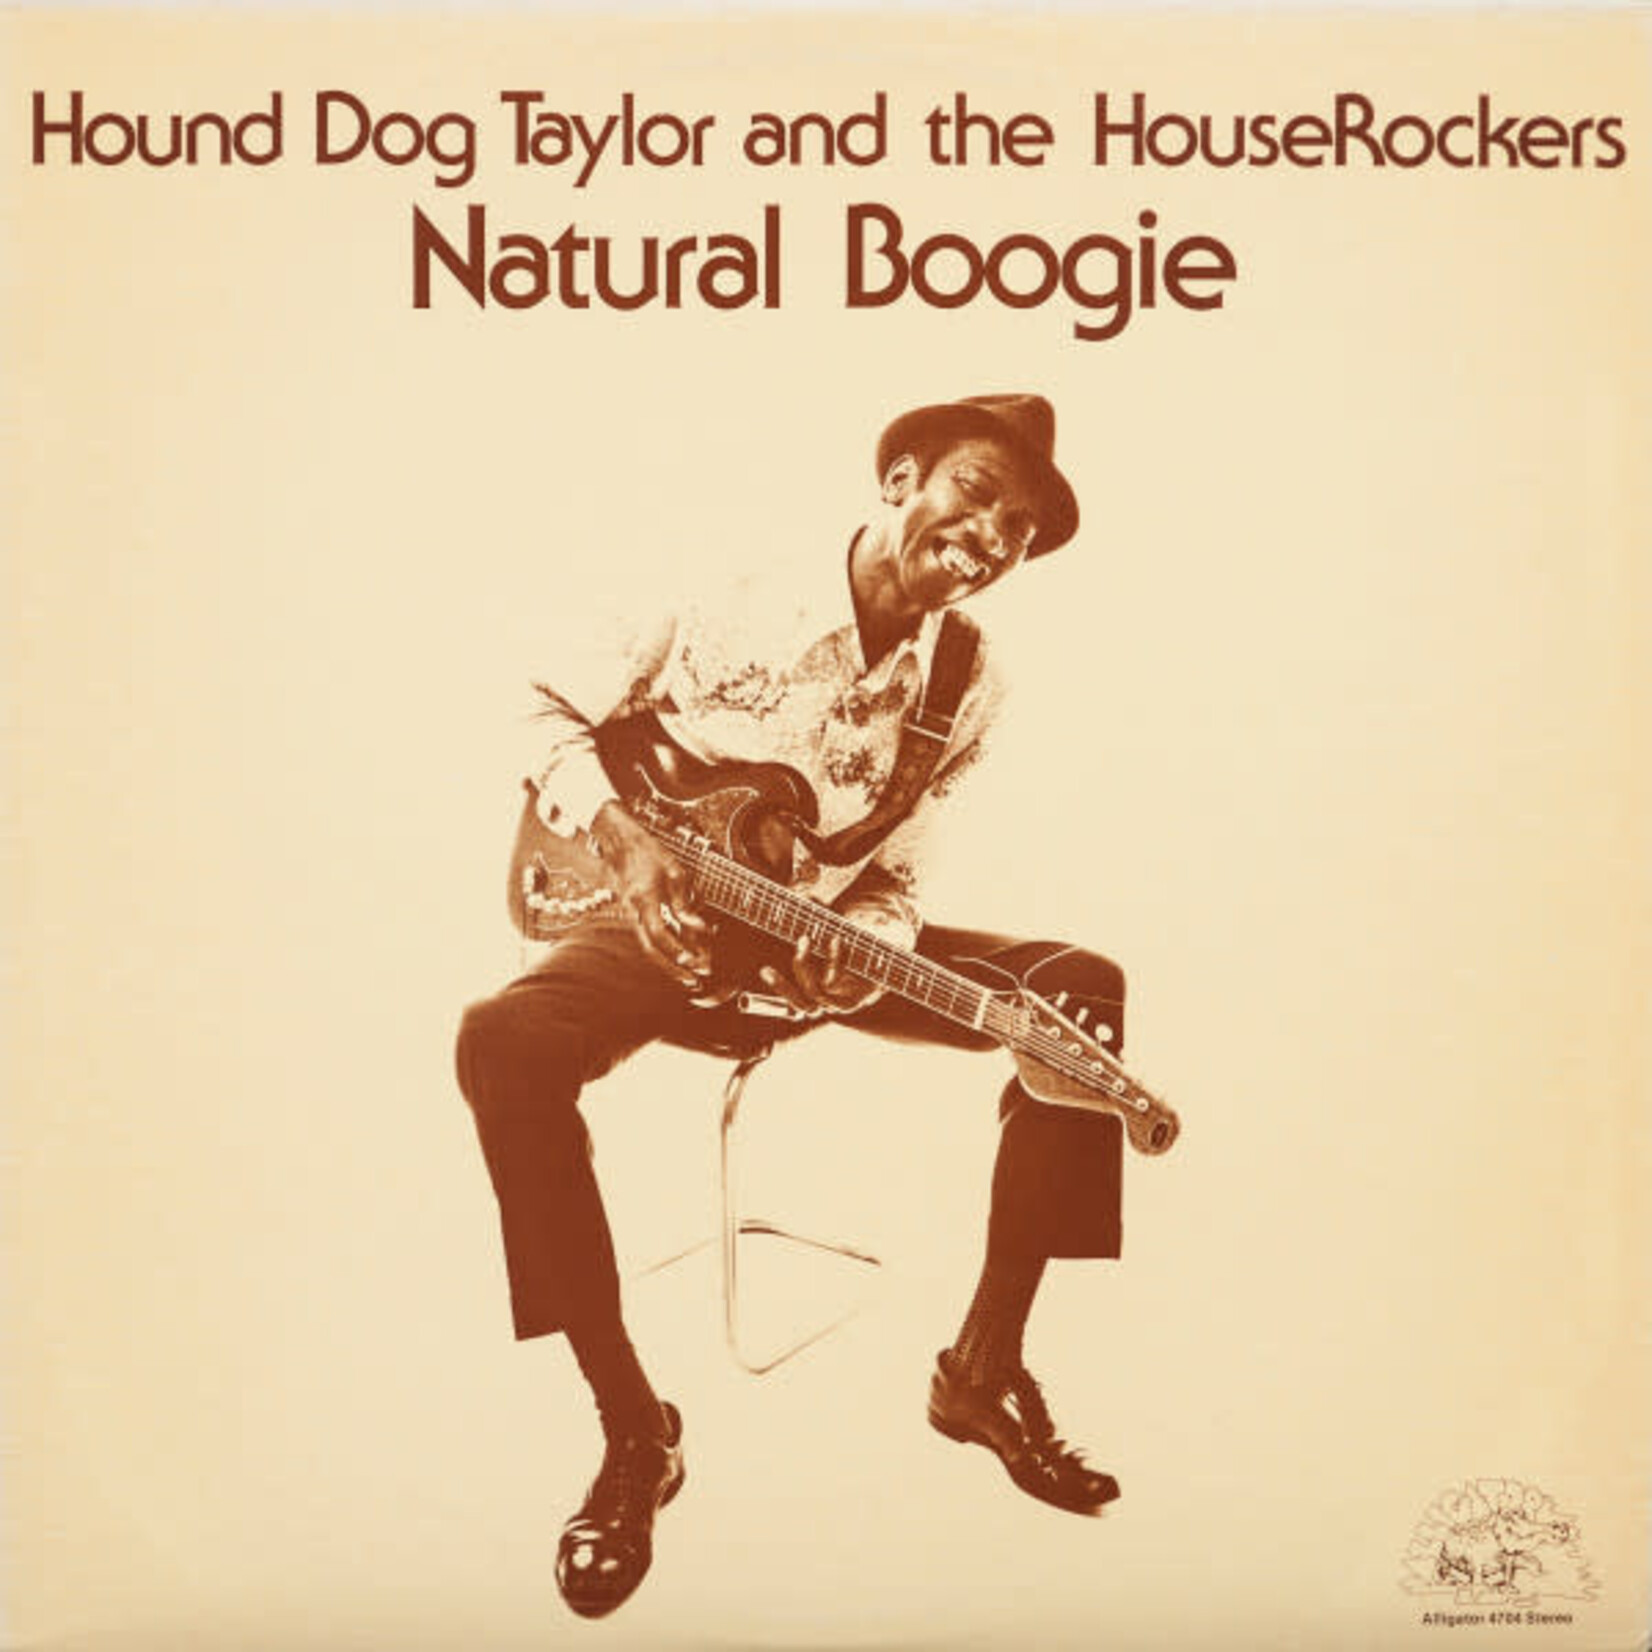 [New] Taylor, Hound Dog & The Houserockers: Natural Boogie [ALLIGATOR]